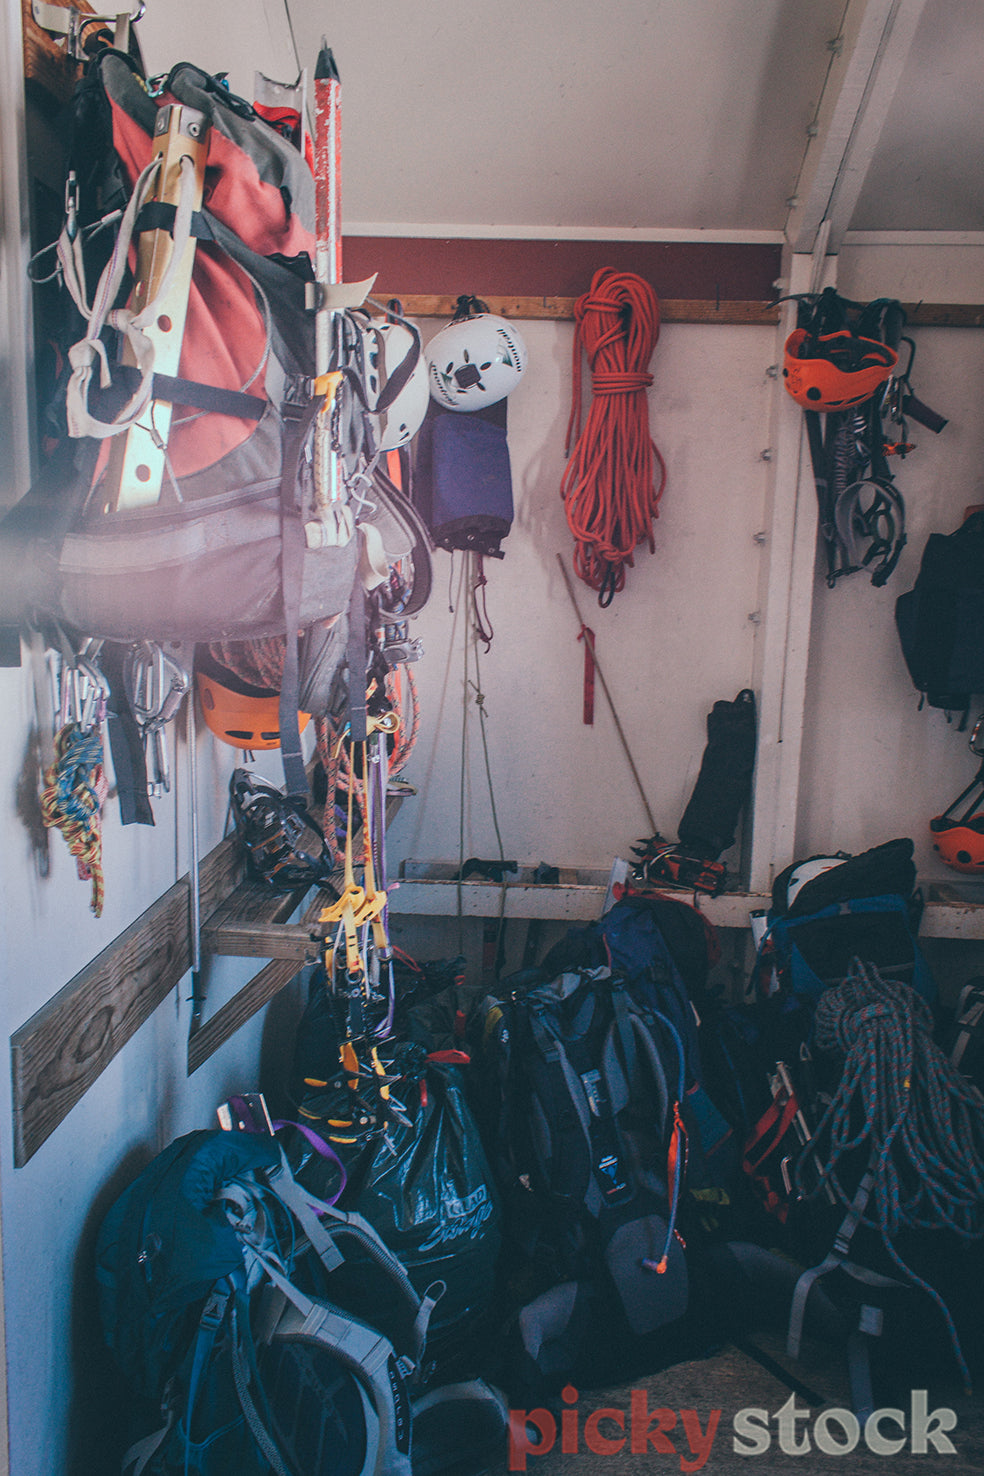 Alpine hut stashed with mountaineering and climbing gear